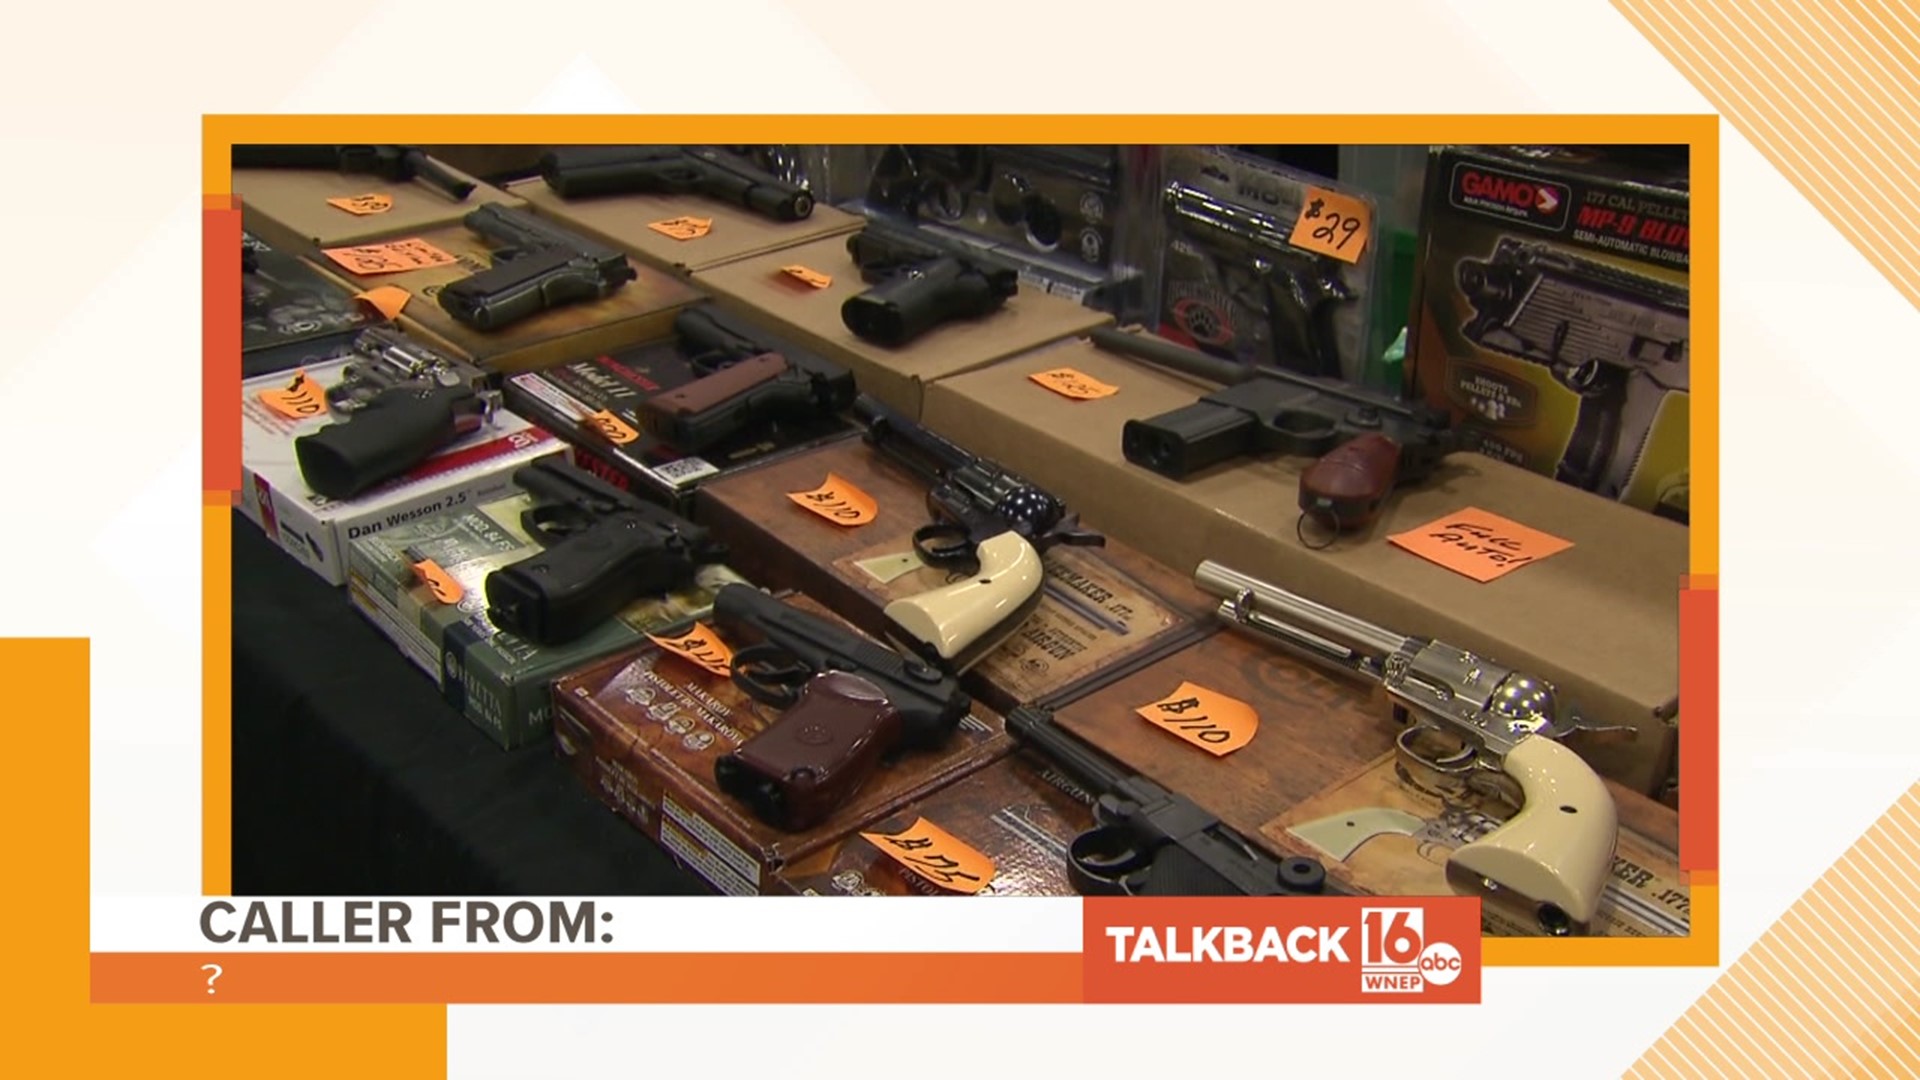 Many callers have reactions to the recent mass shooting in Colorado, especially when it comes to assault weapons.